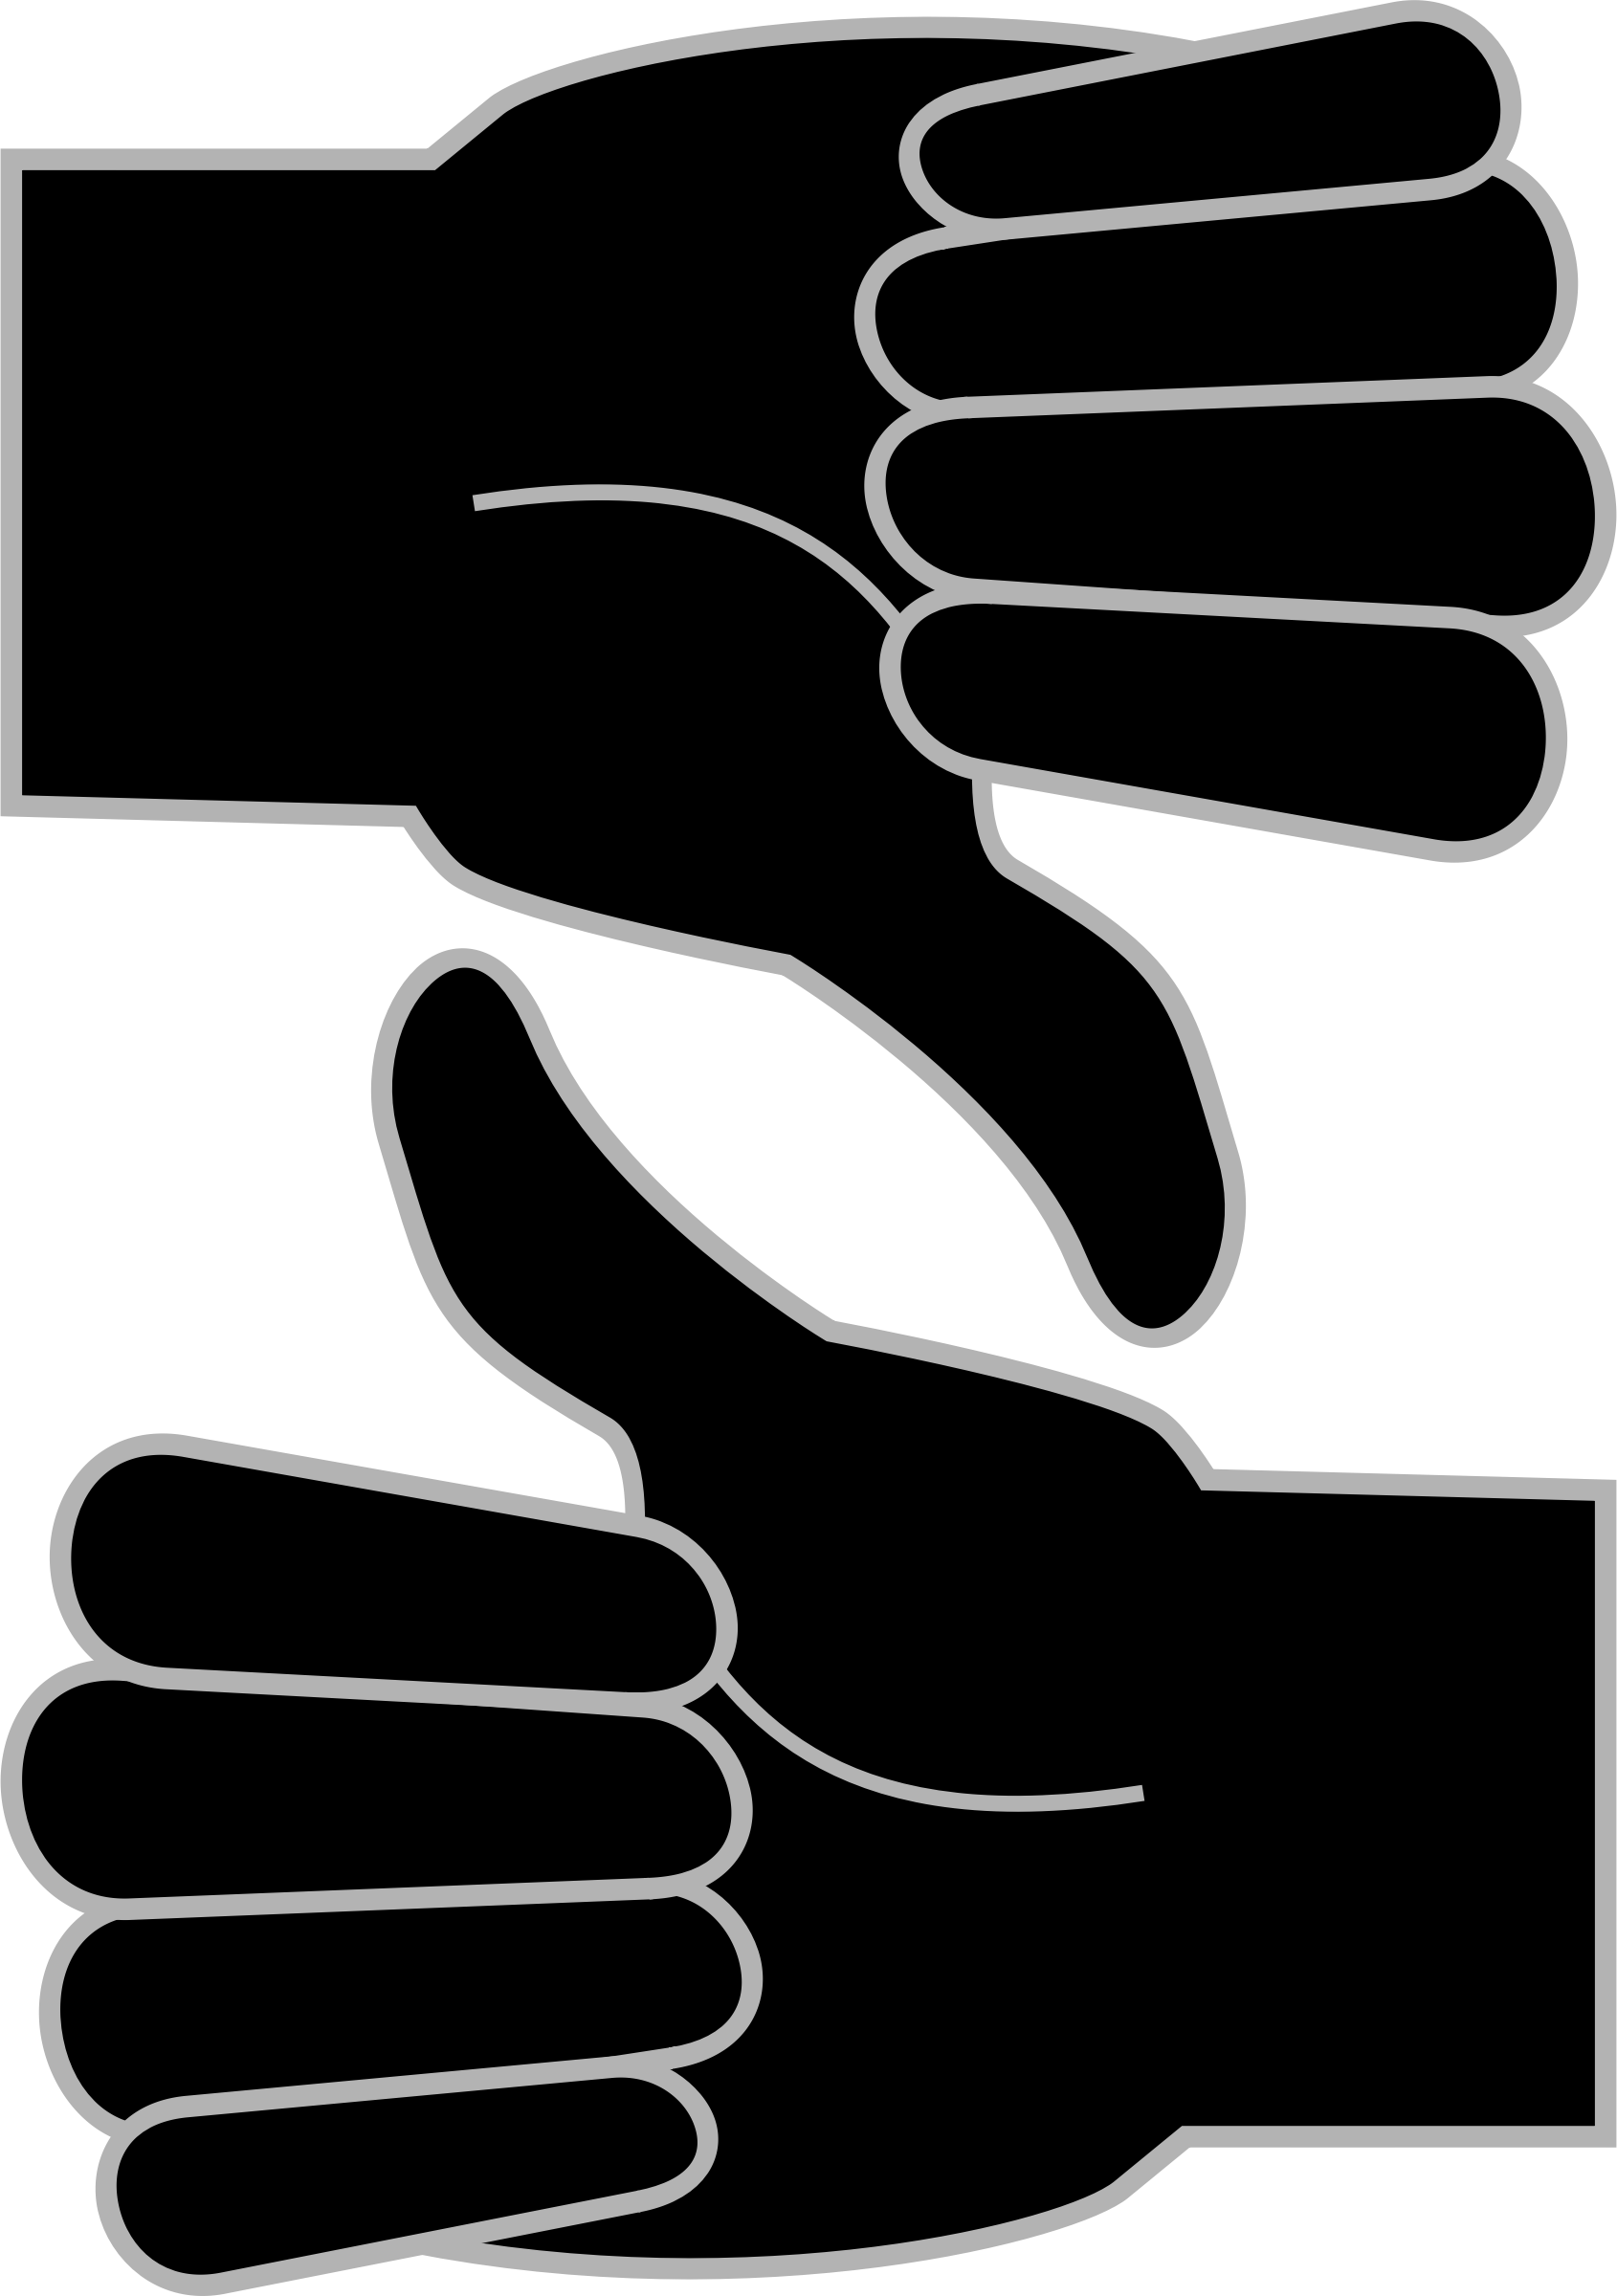 Big Image - Black Thumbs Up And Down (1690x2400)